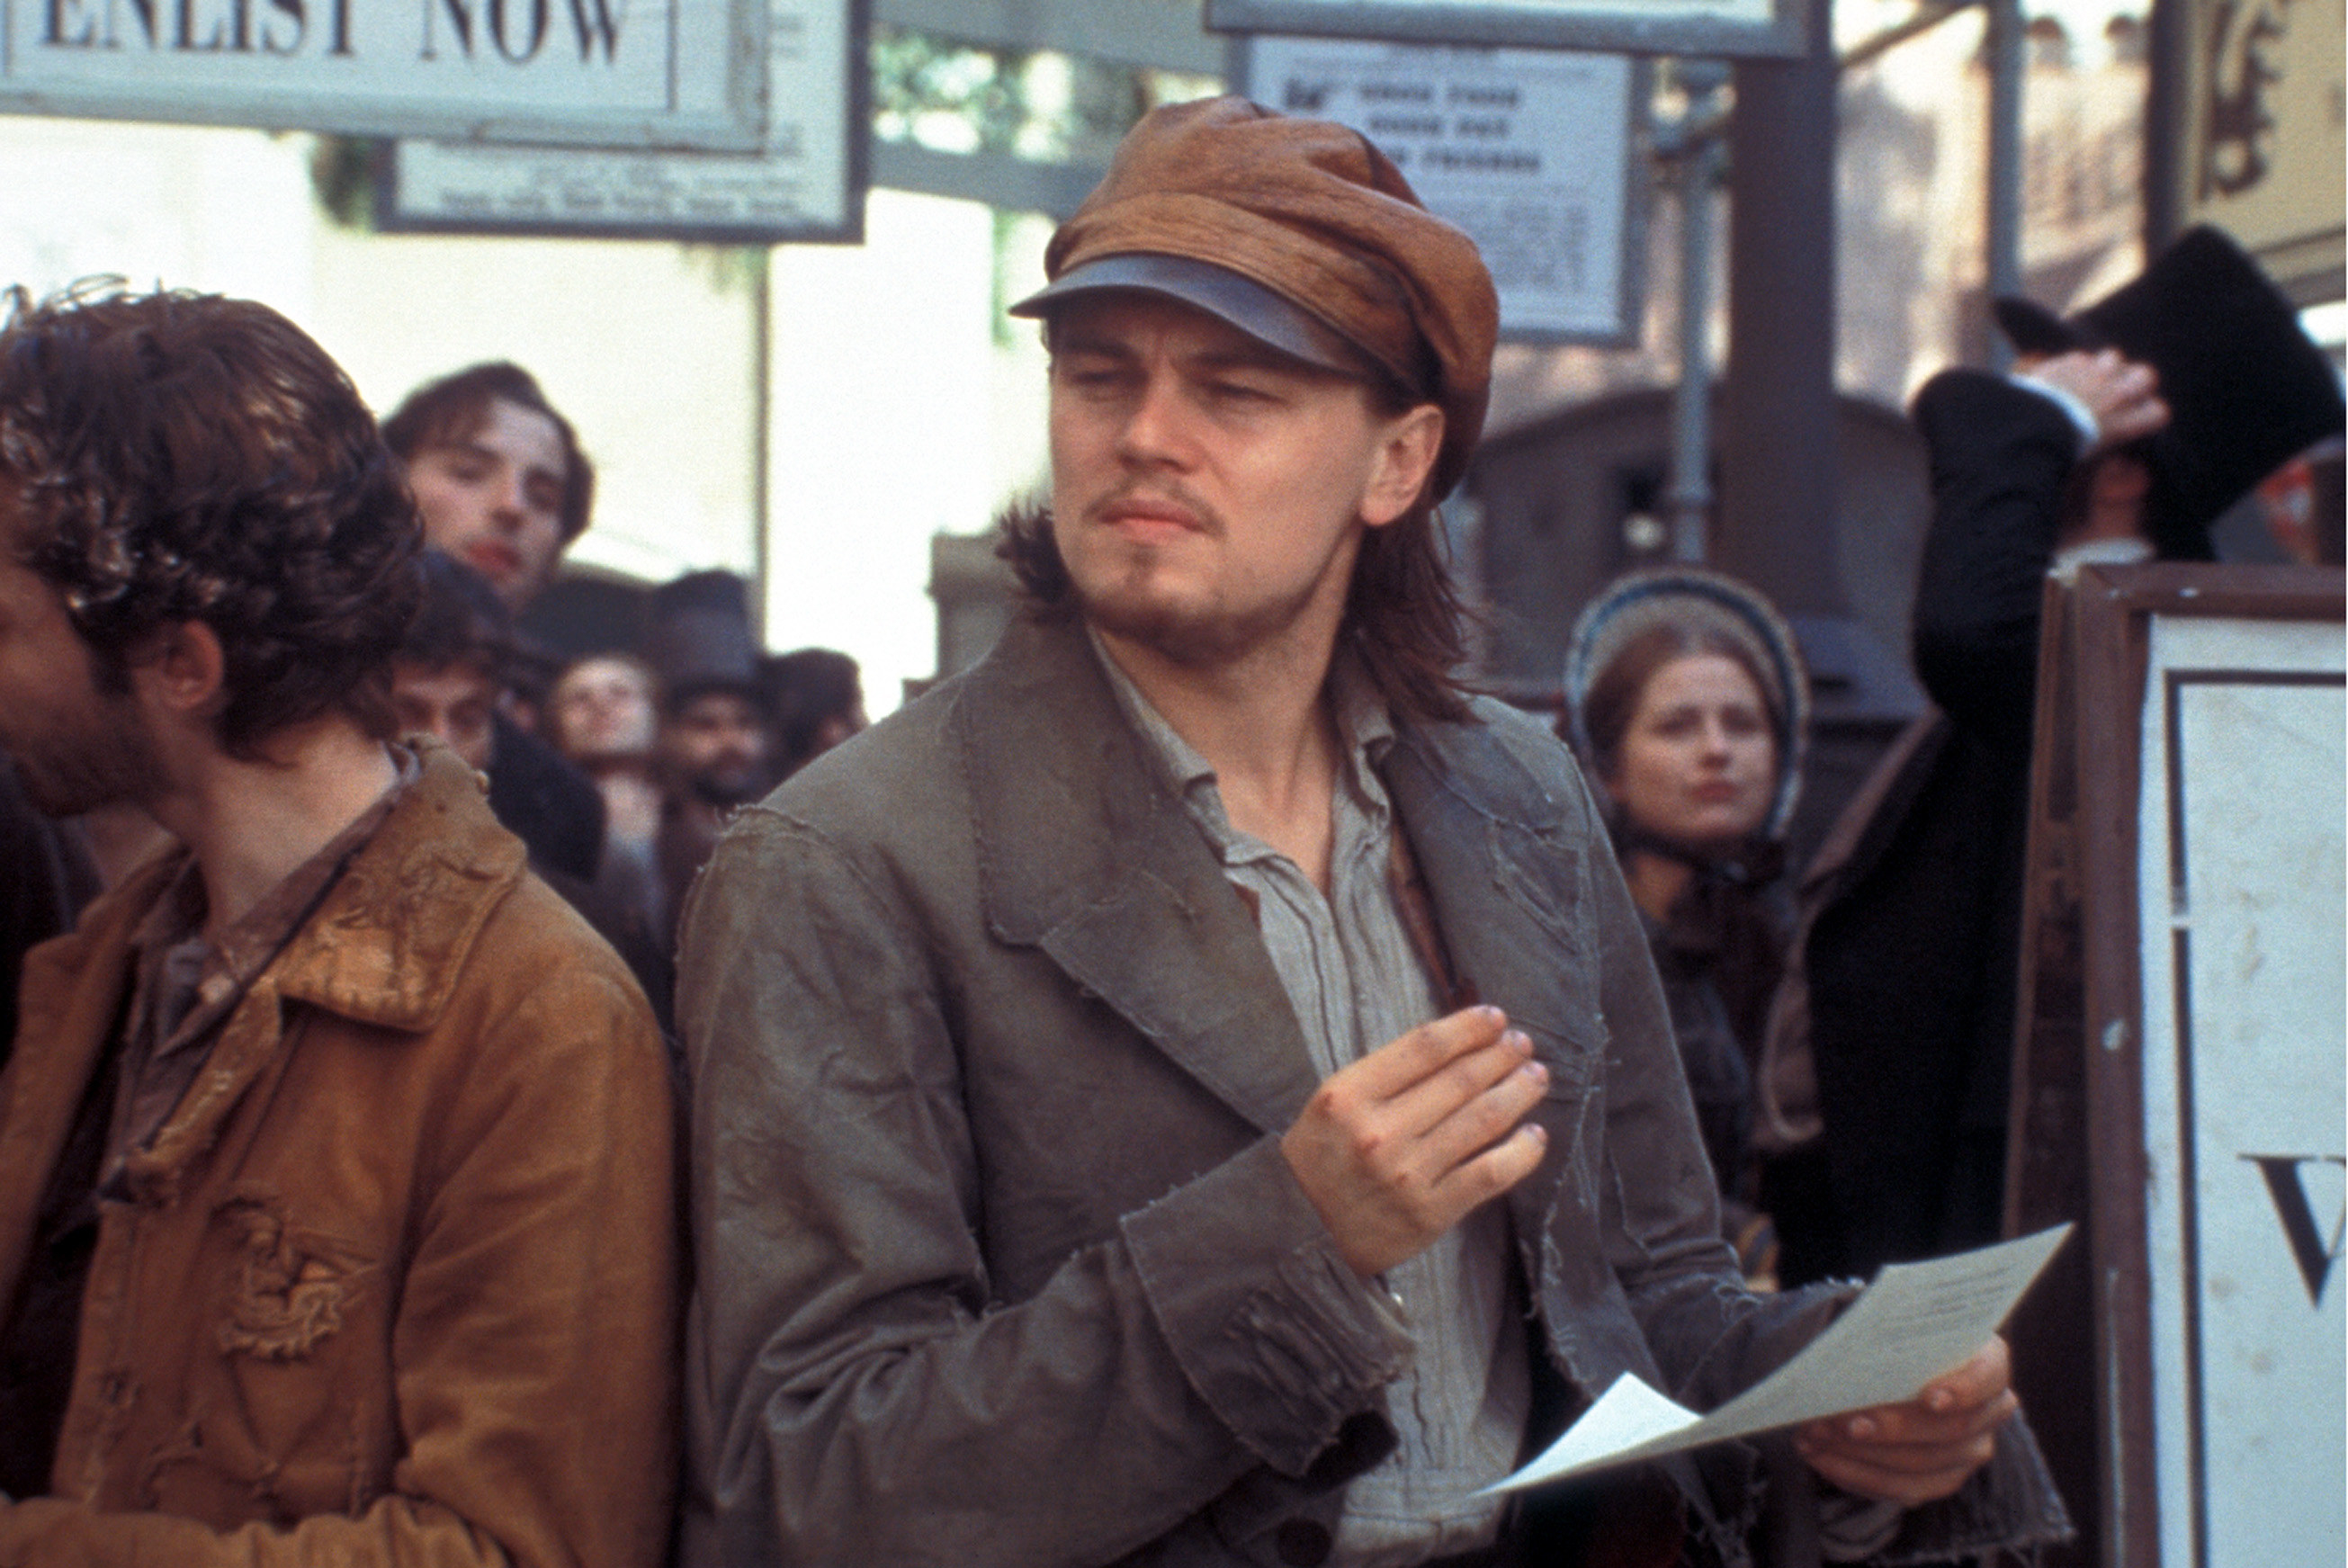 Leonardo DiCaprio wears a dirty hat and stands in a crowd